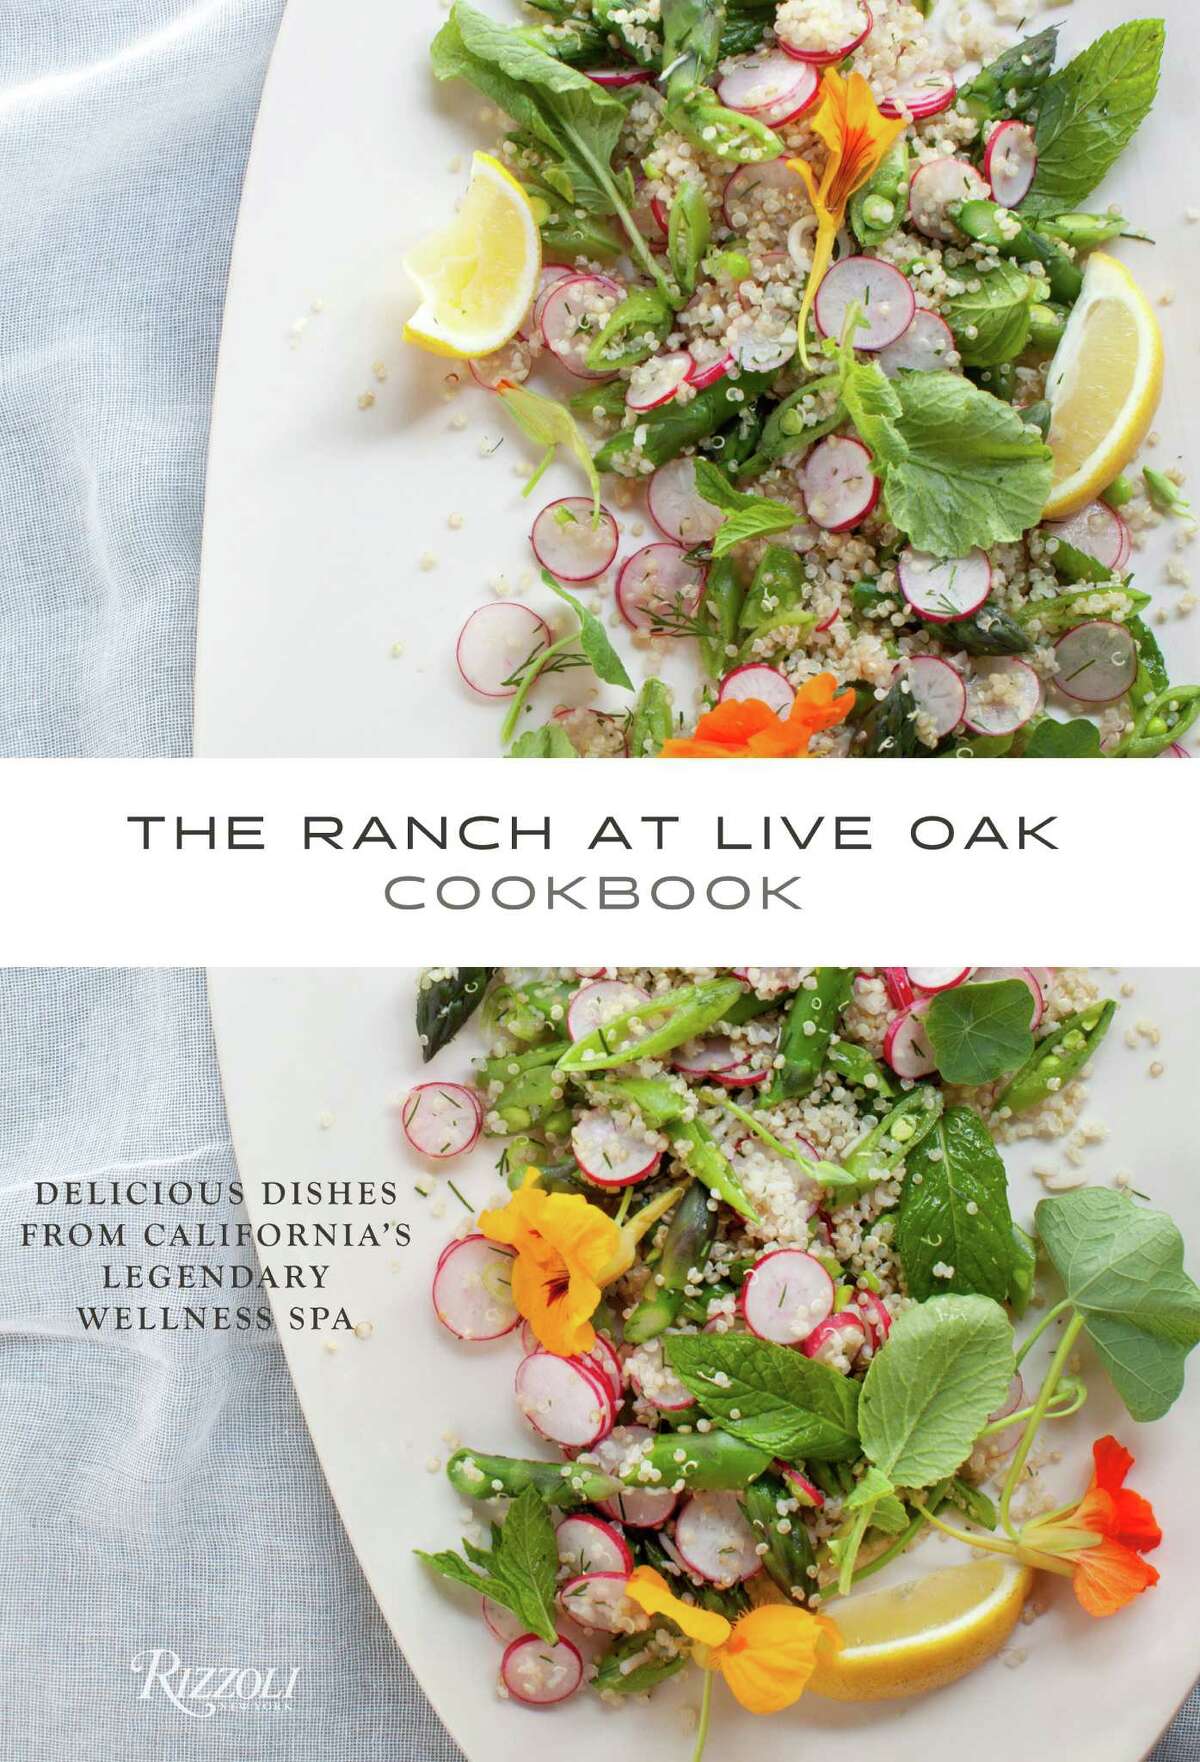 The Ranch at Live Oak Cookbook by Sue an Alex Glasscock, 224 pages, photography by Sara Remington, $35.